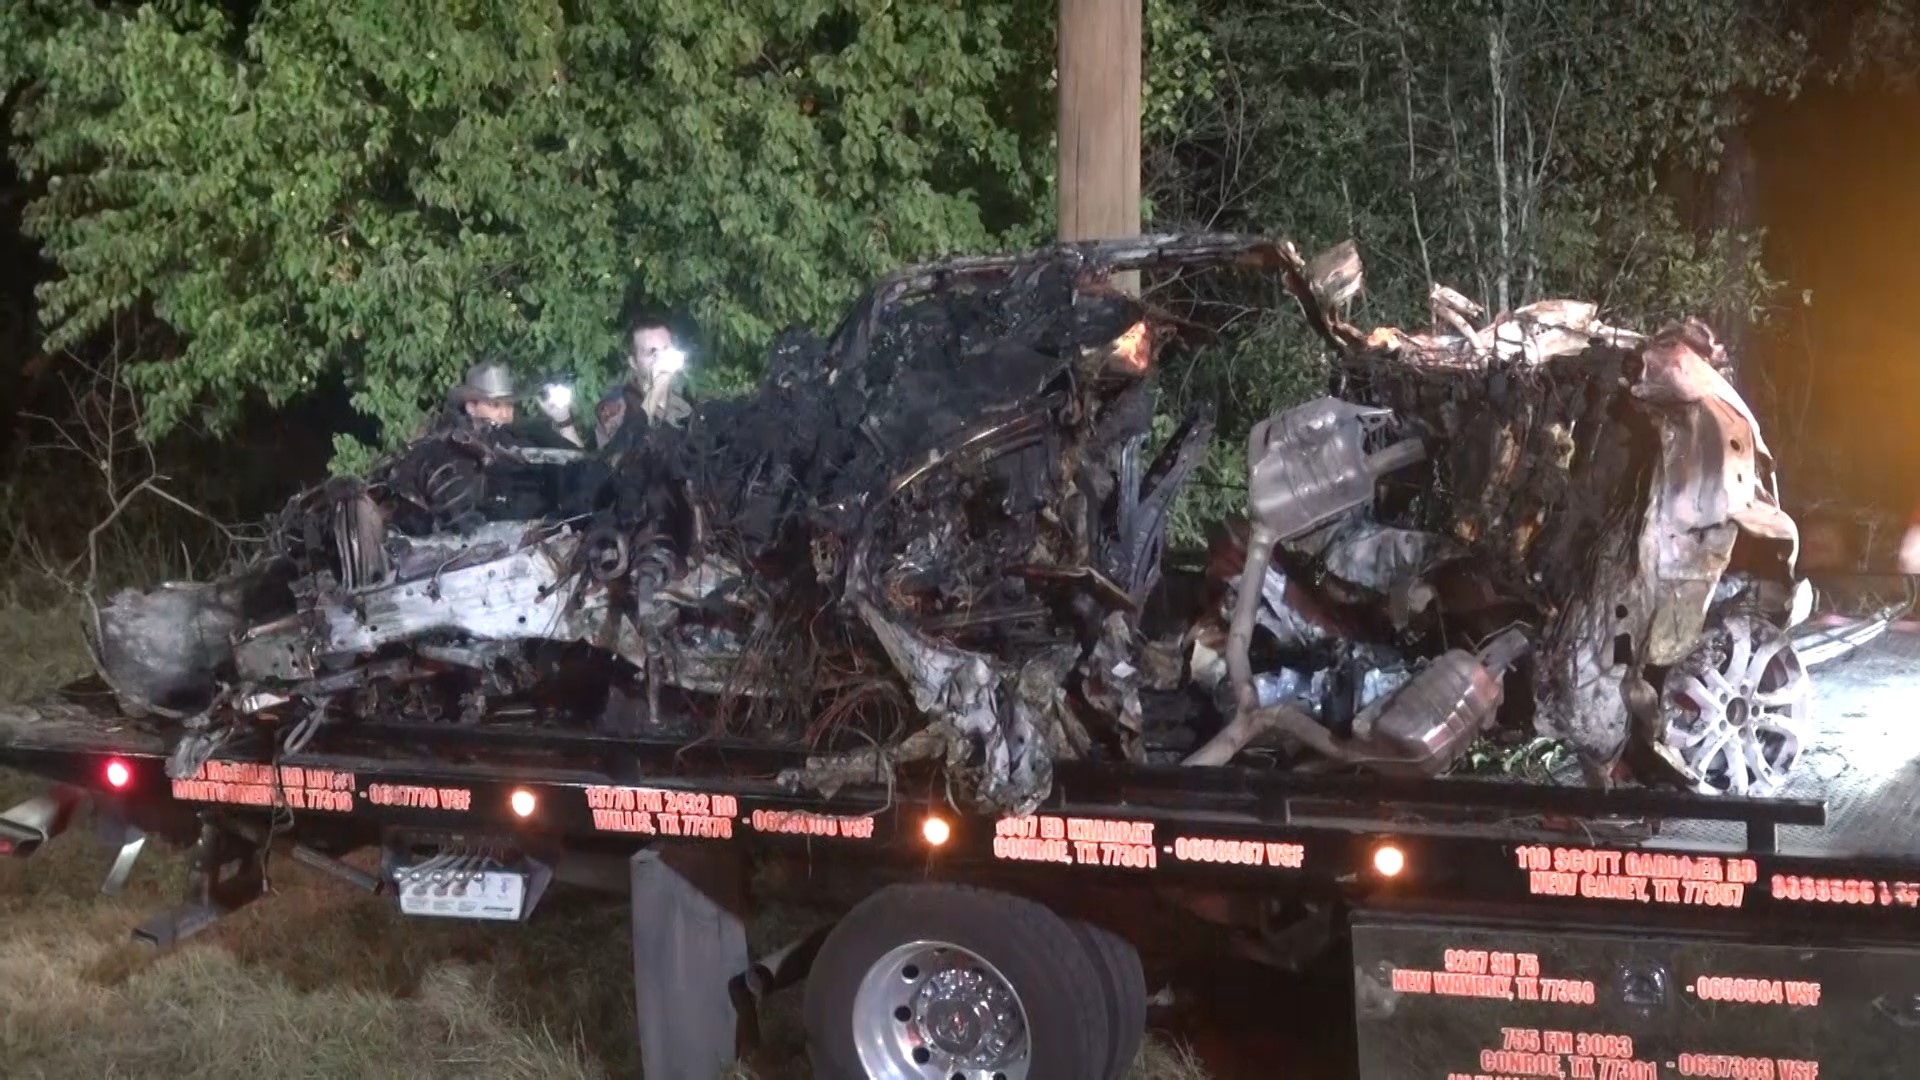 Witnesses said the driver was likely speeding before he crashed into the woods.